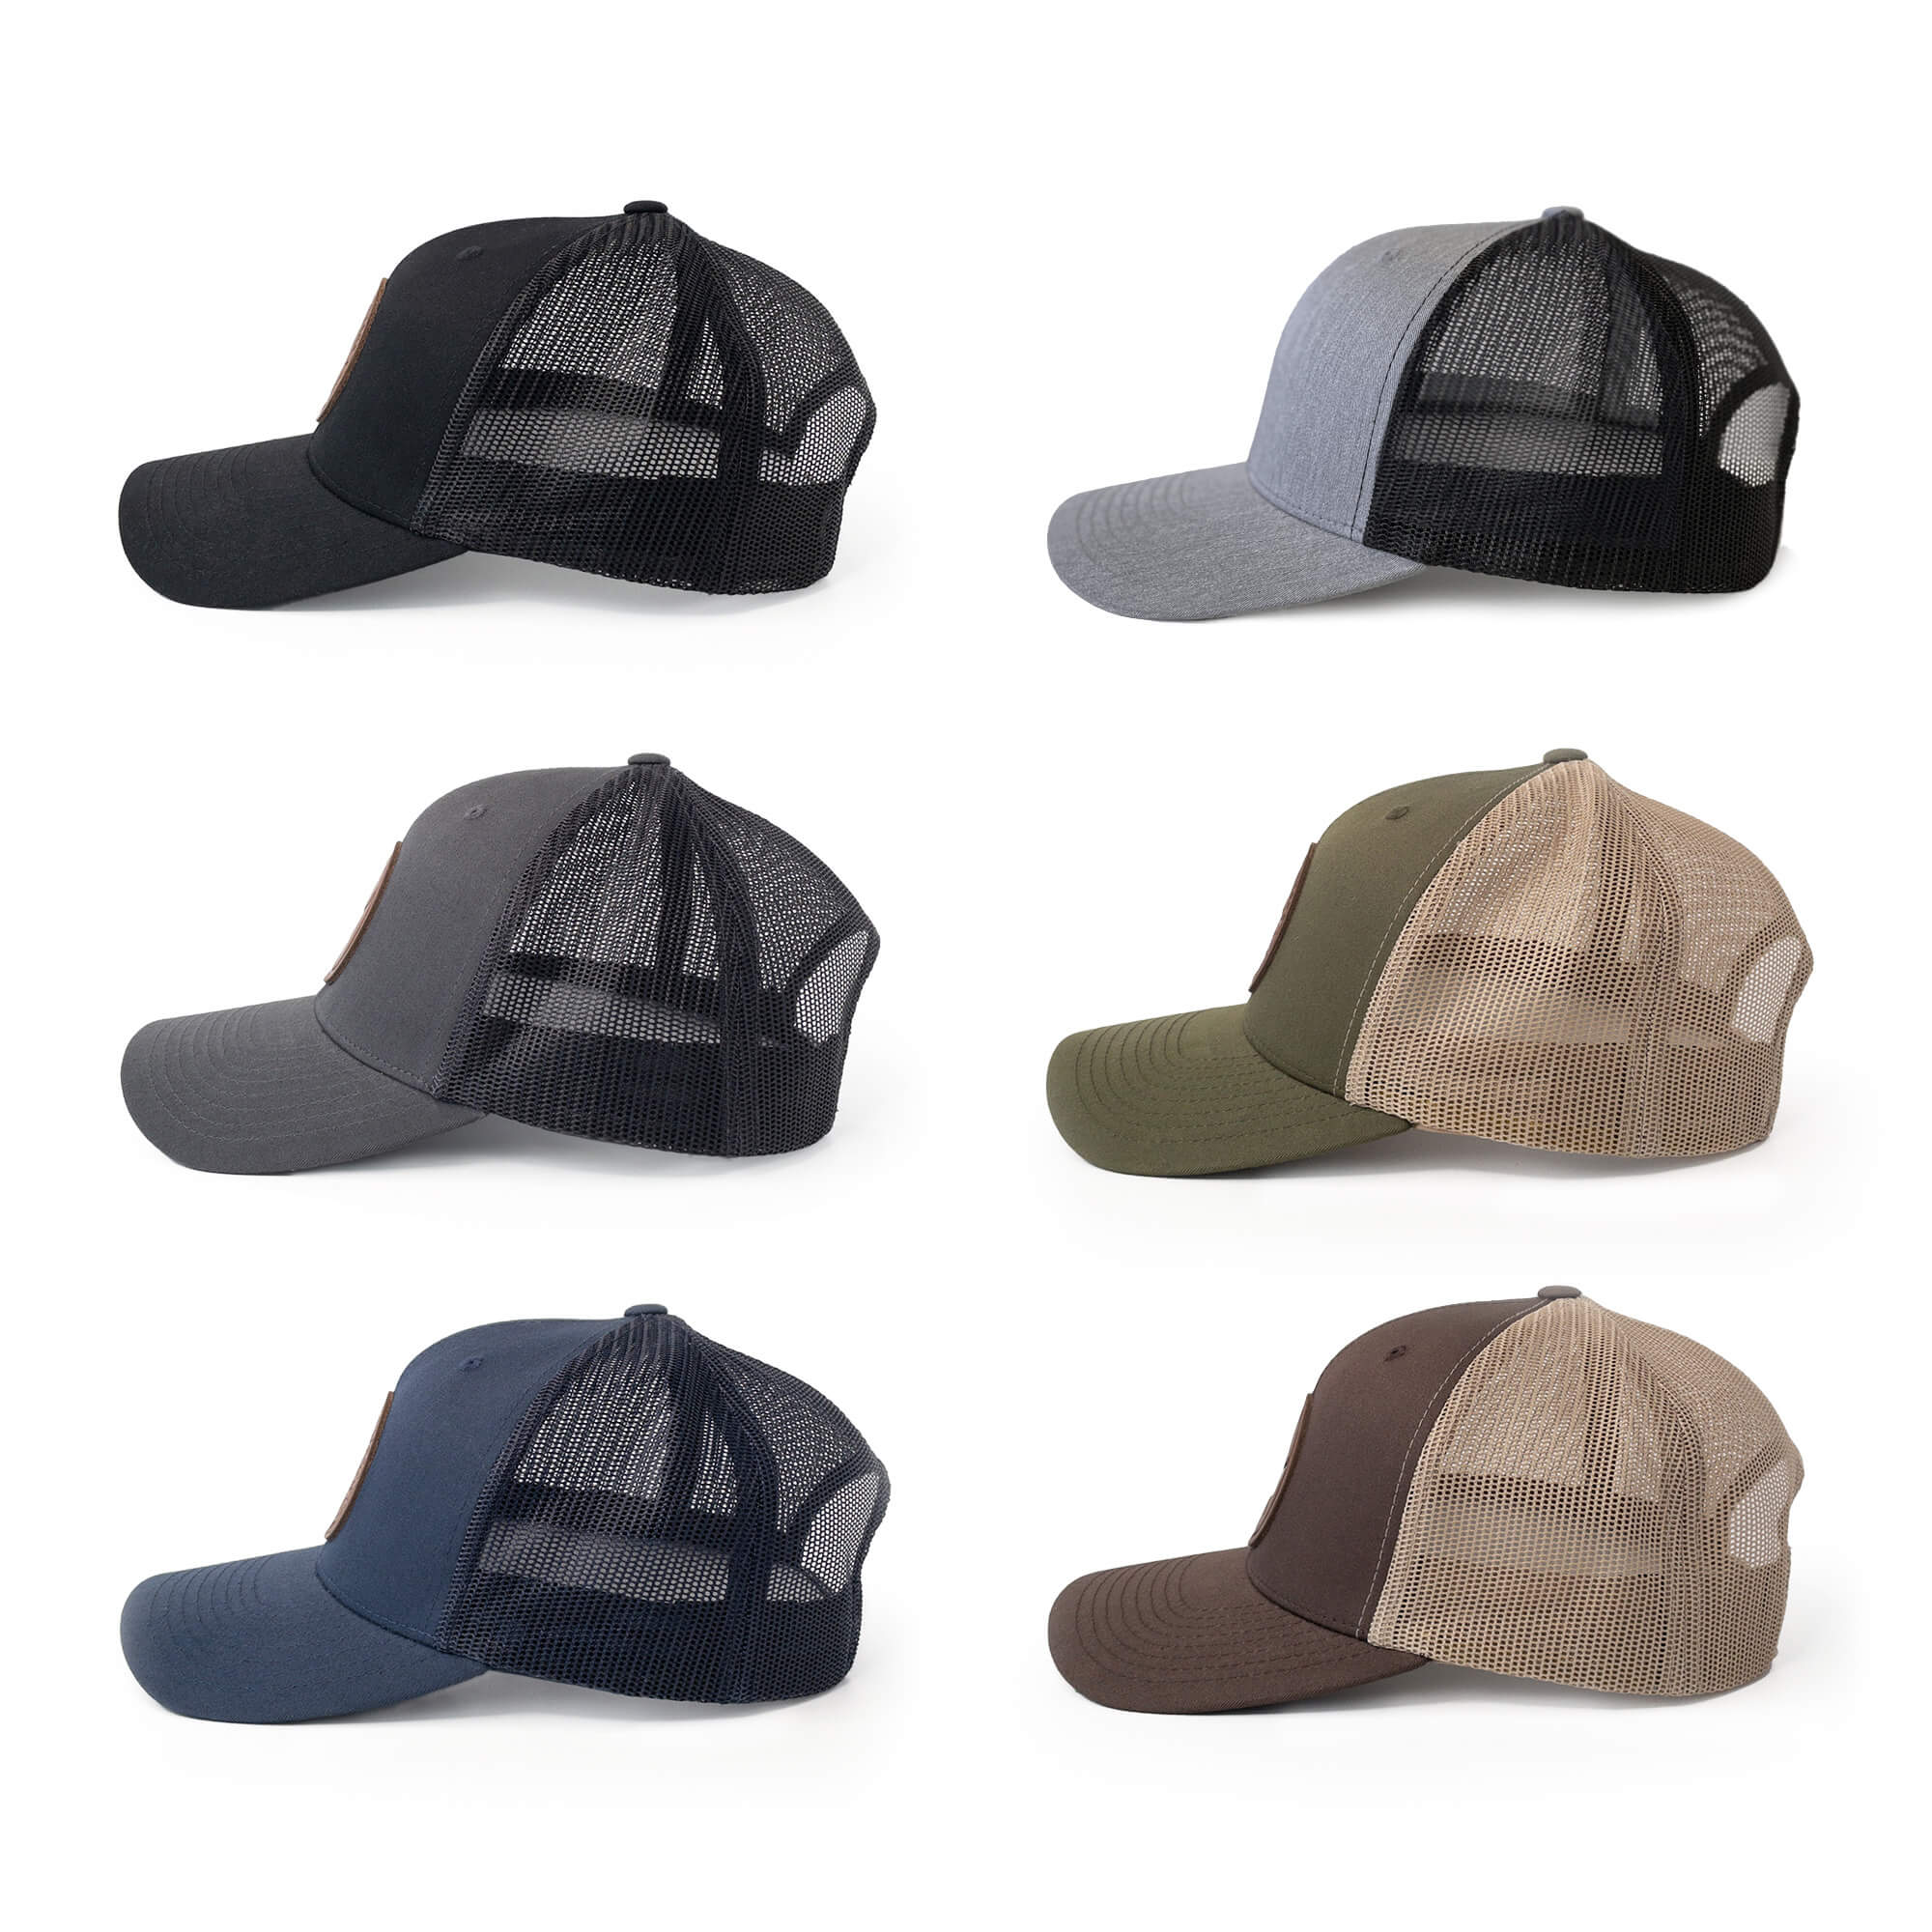 Leather patch trucker hats available in 6 colors | BLACK-003-009, CHARC-003-009, NAVY-003-009, HGREY-003-009, MOSS-003-009, BROWN-003-009